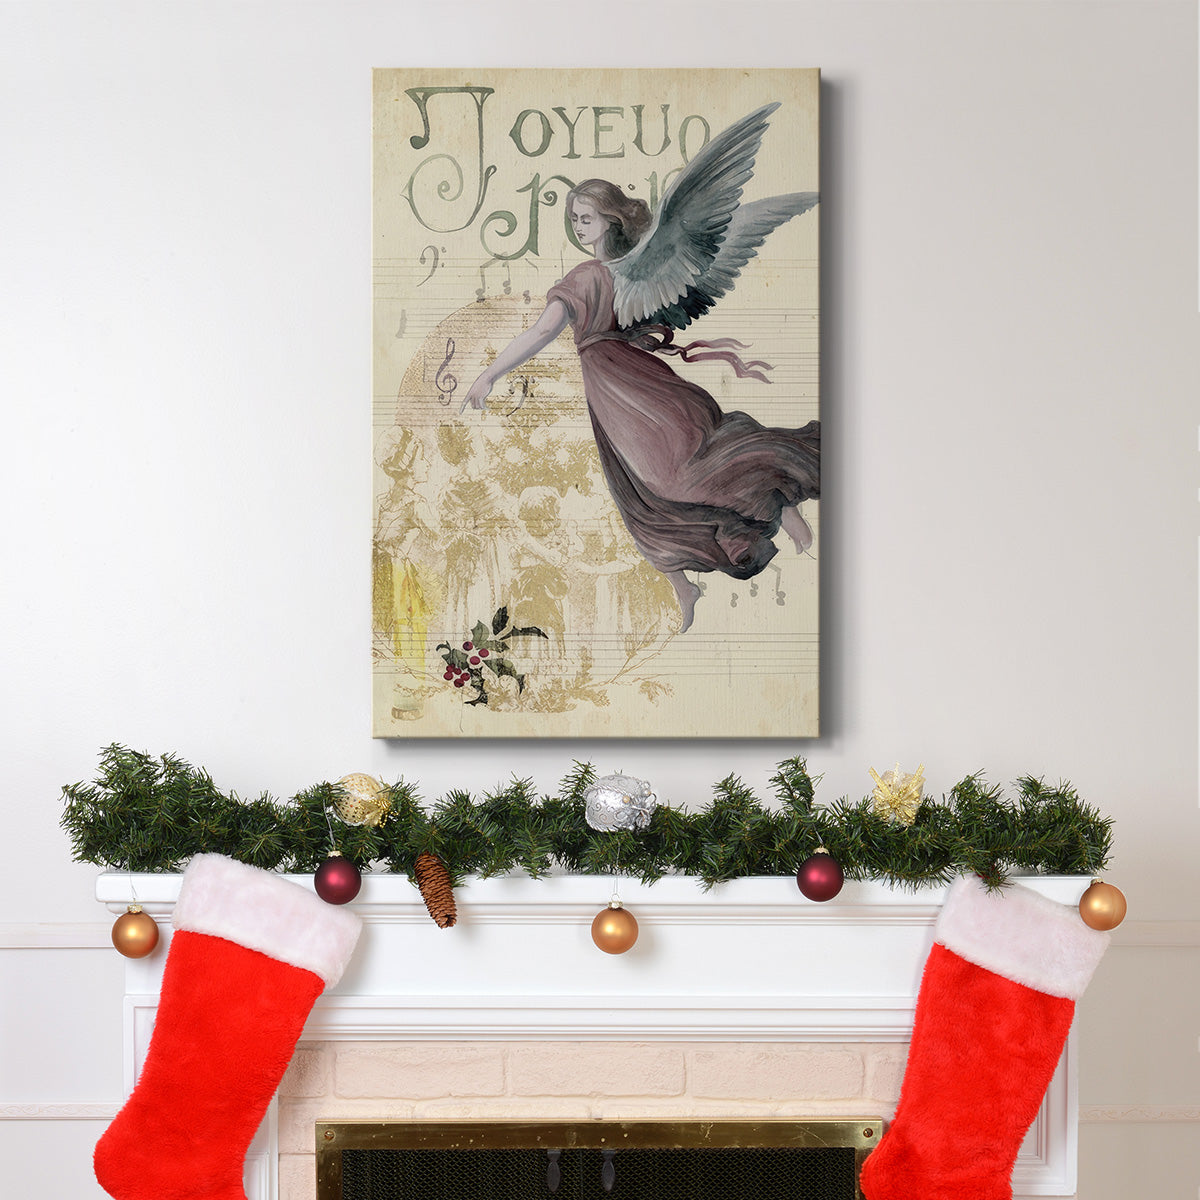 Christmas Greetings Collection B - Gallery Wrapped Canvas